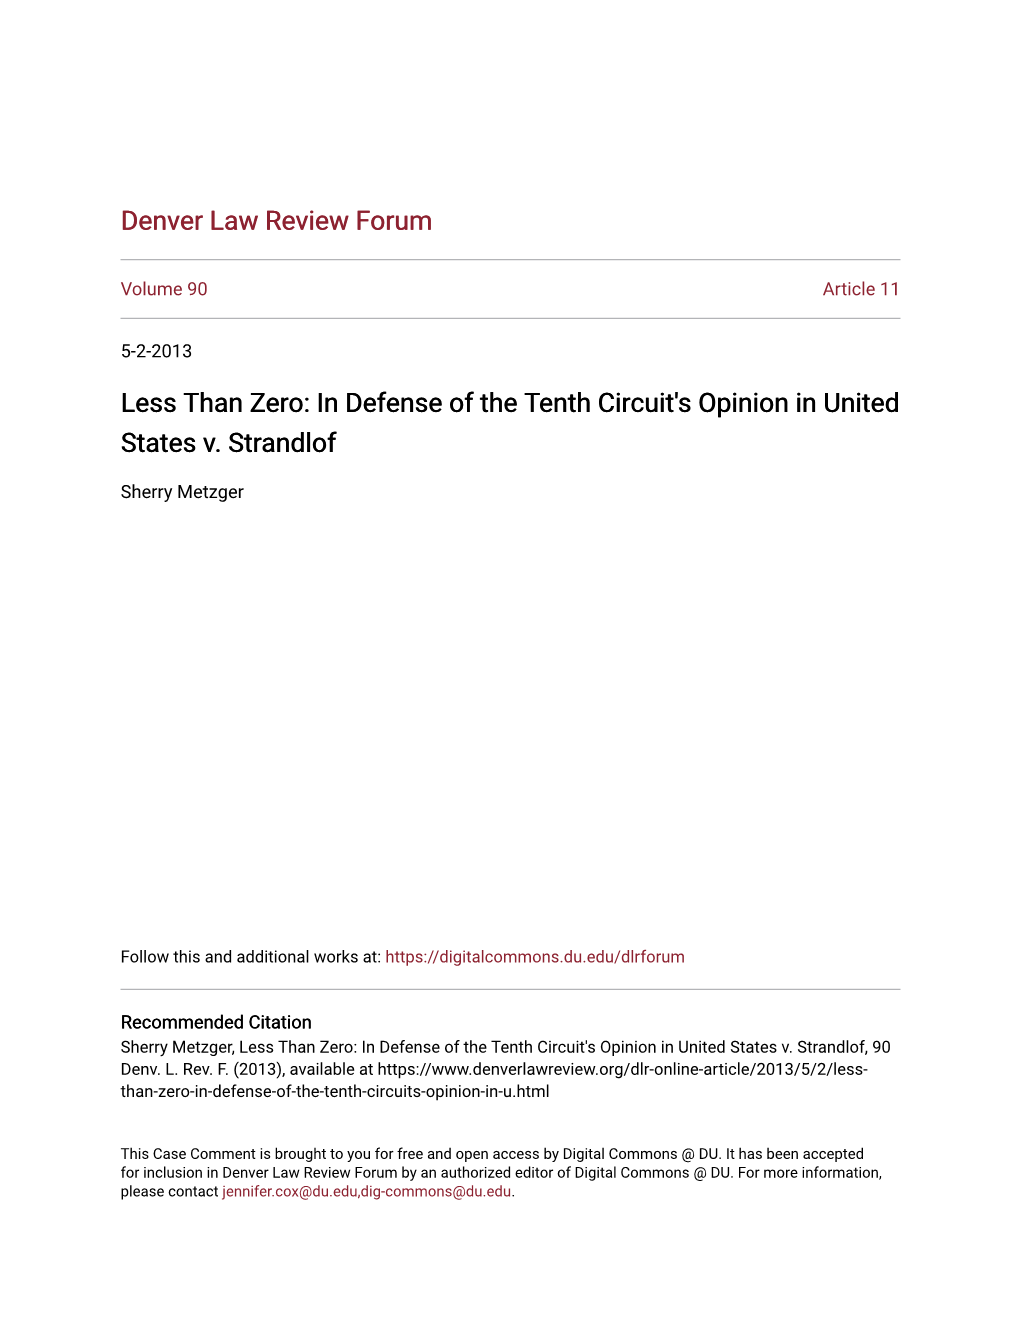 In Defense of the Tenth Circuit's Opinion in United States V. Strandlof